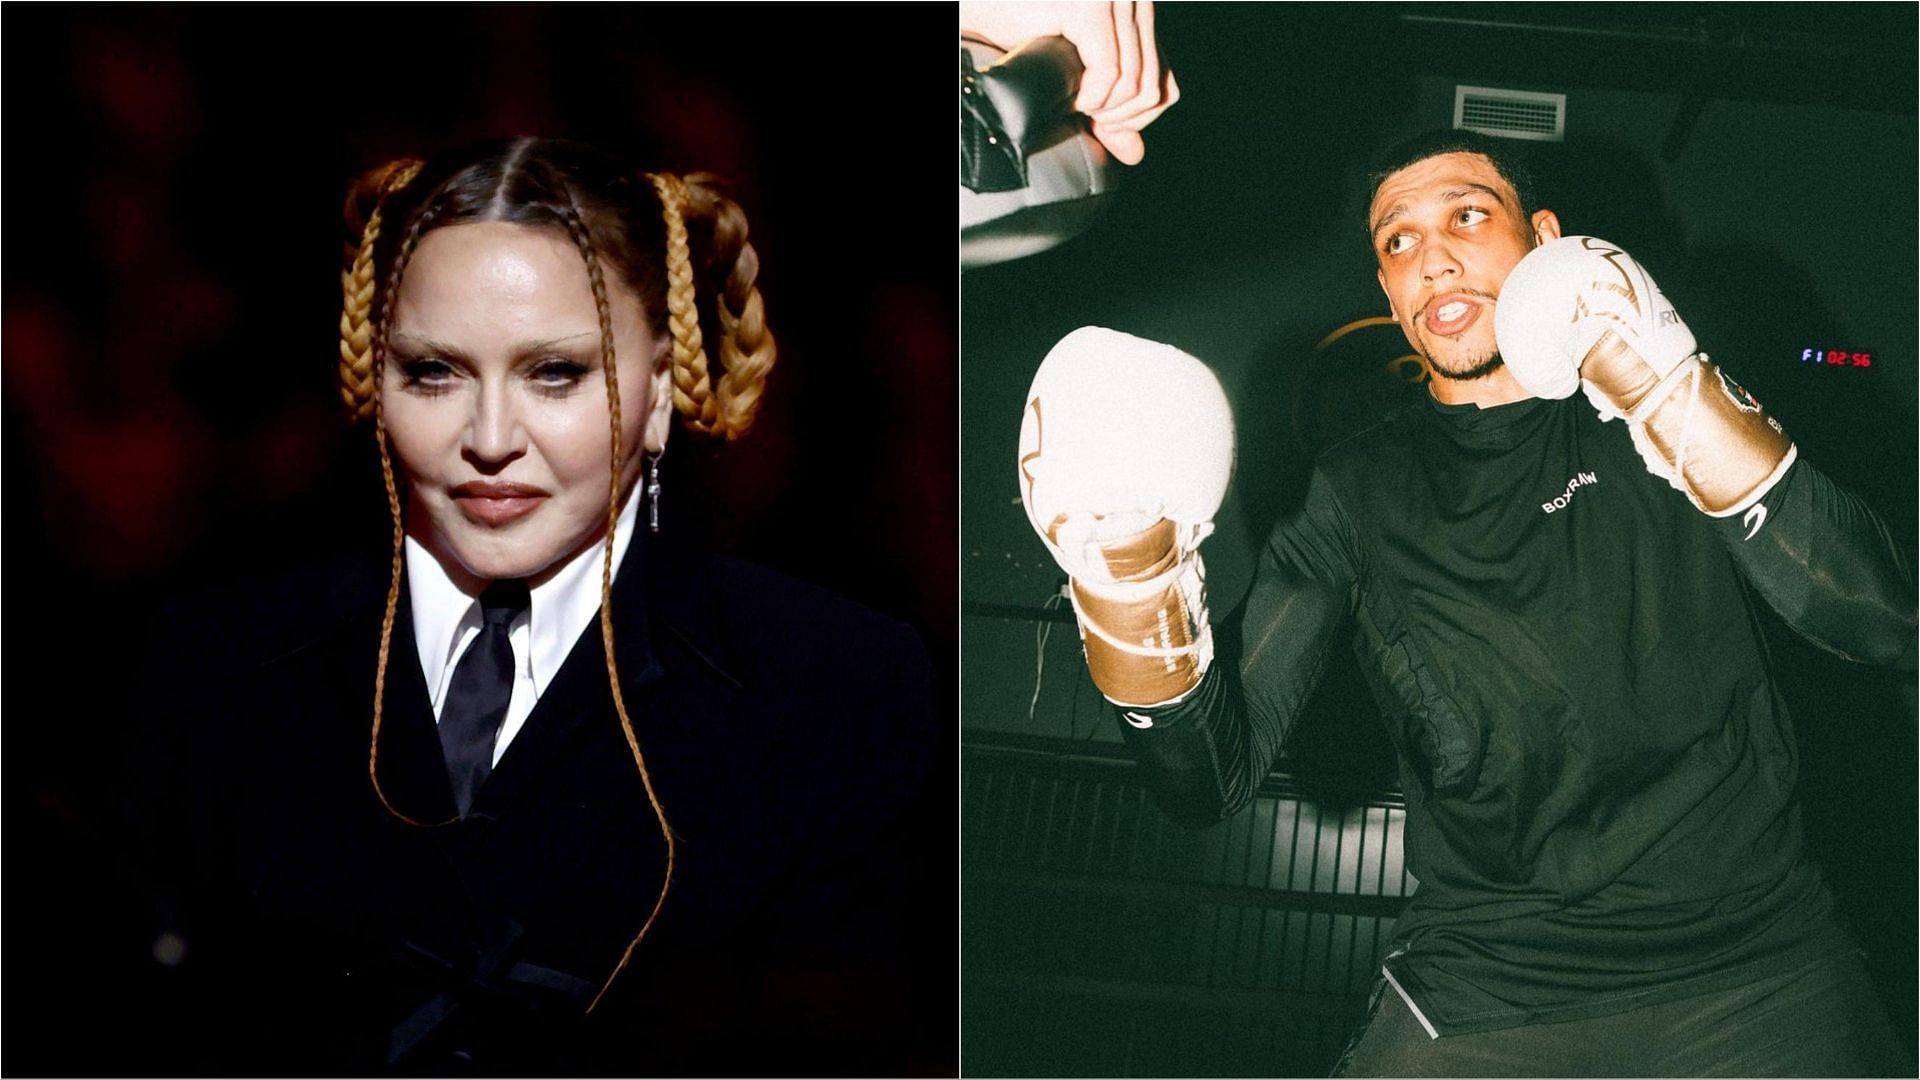 Madonna and Josh Popper are reportedly linked to each other (Images via Frazer Harrison/Getty Images and _joshpopper/Instagram)